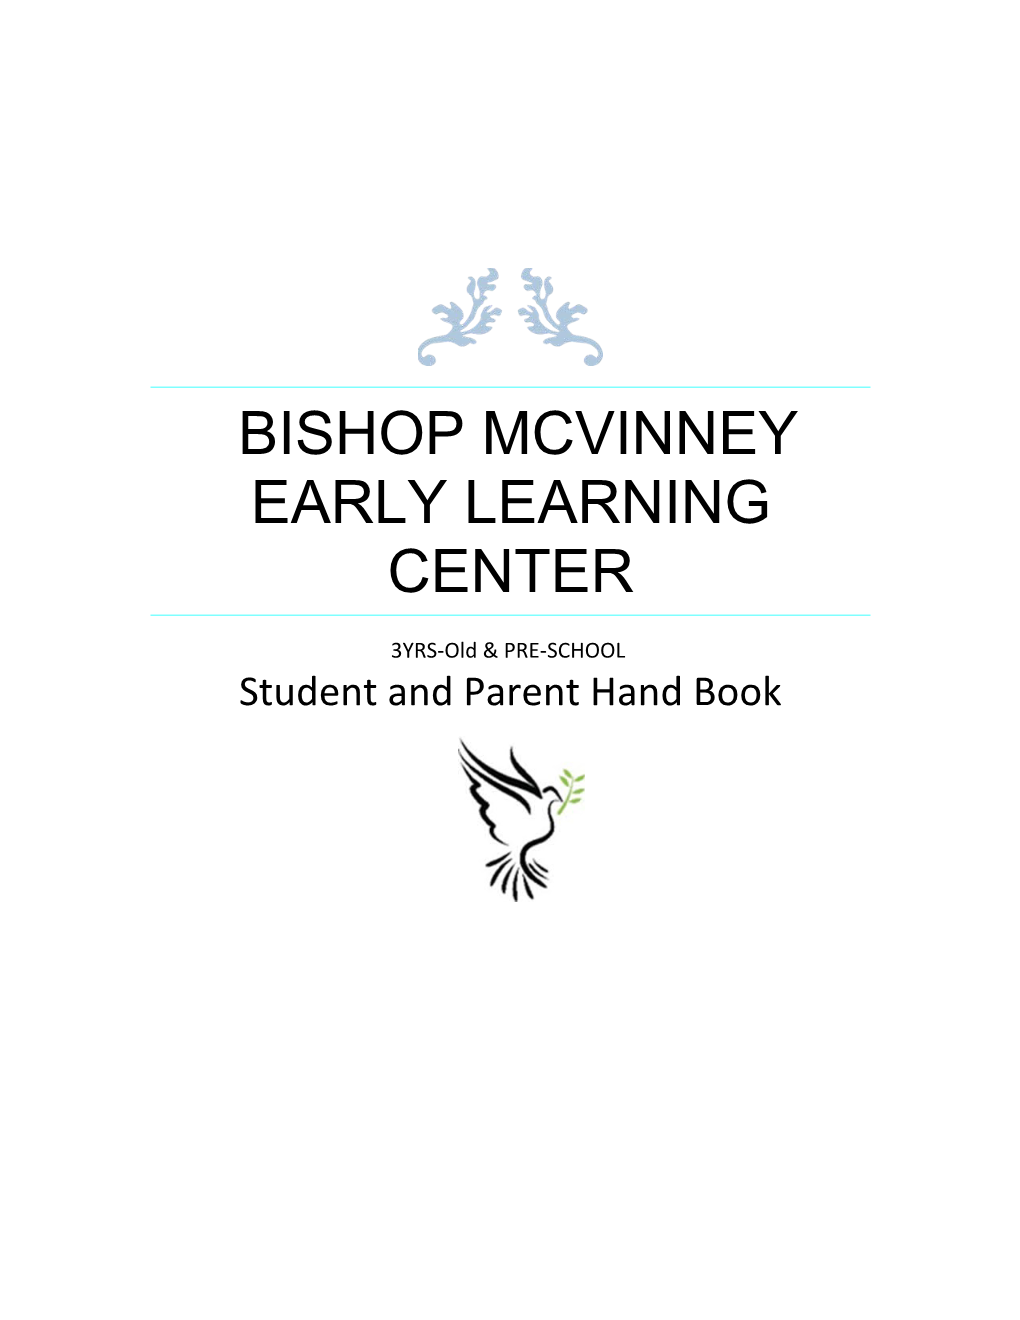 Bishop Mcvinney Early Learning Center